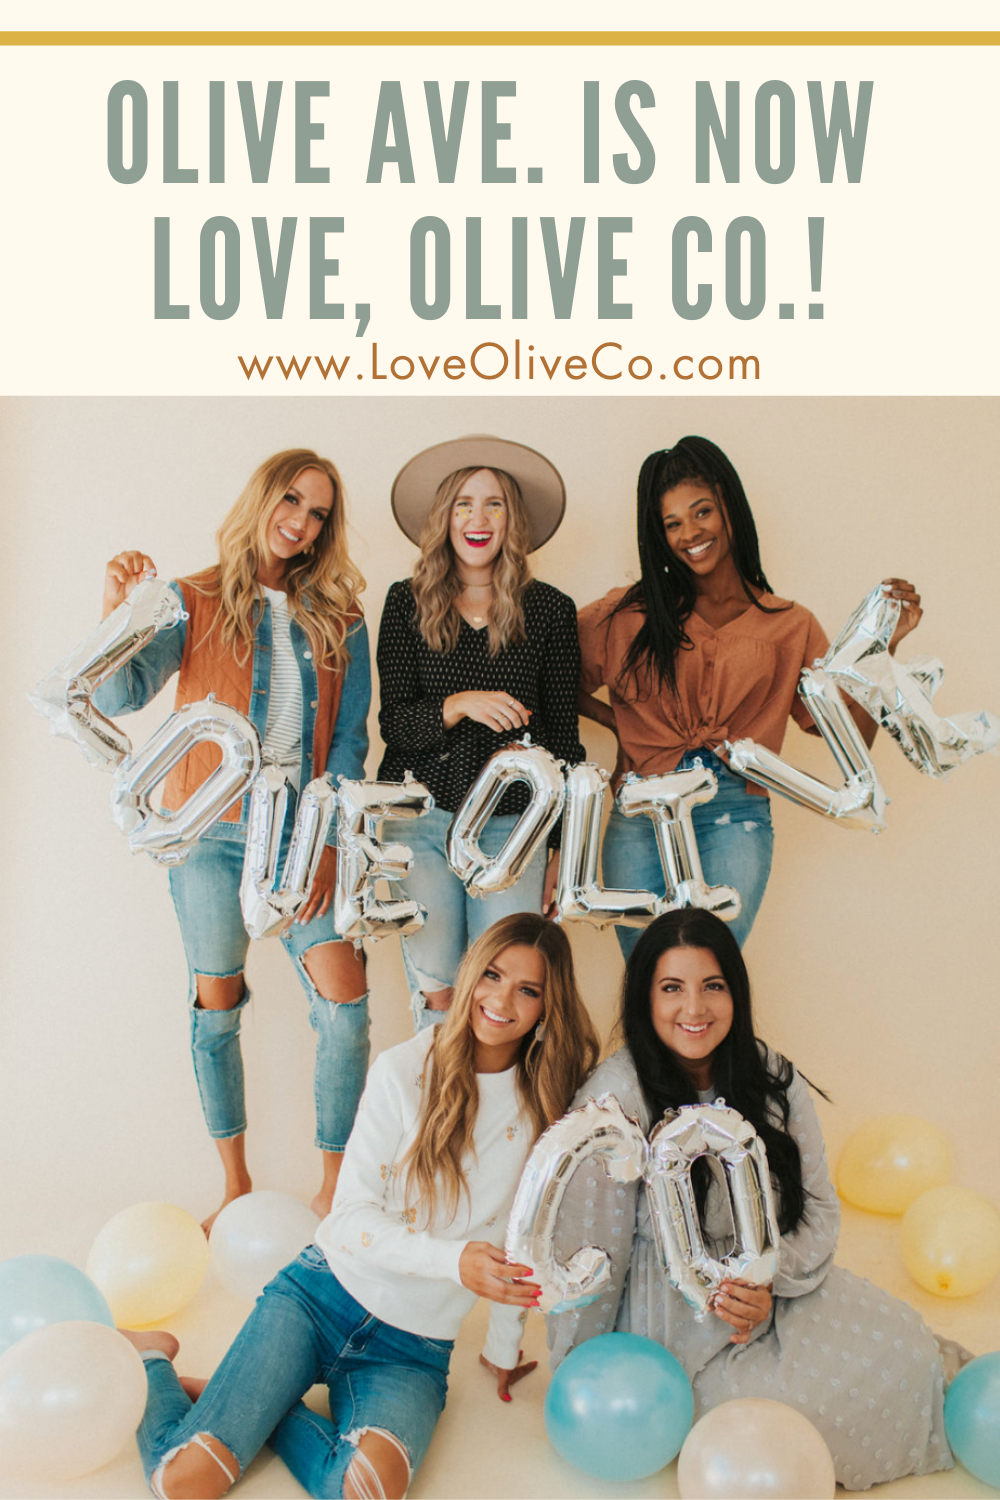 Olive Ave. is Now Love, Olive Co.! www.loveoliveco.com